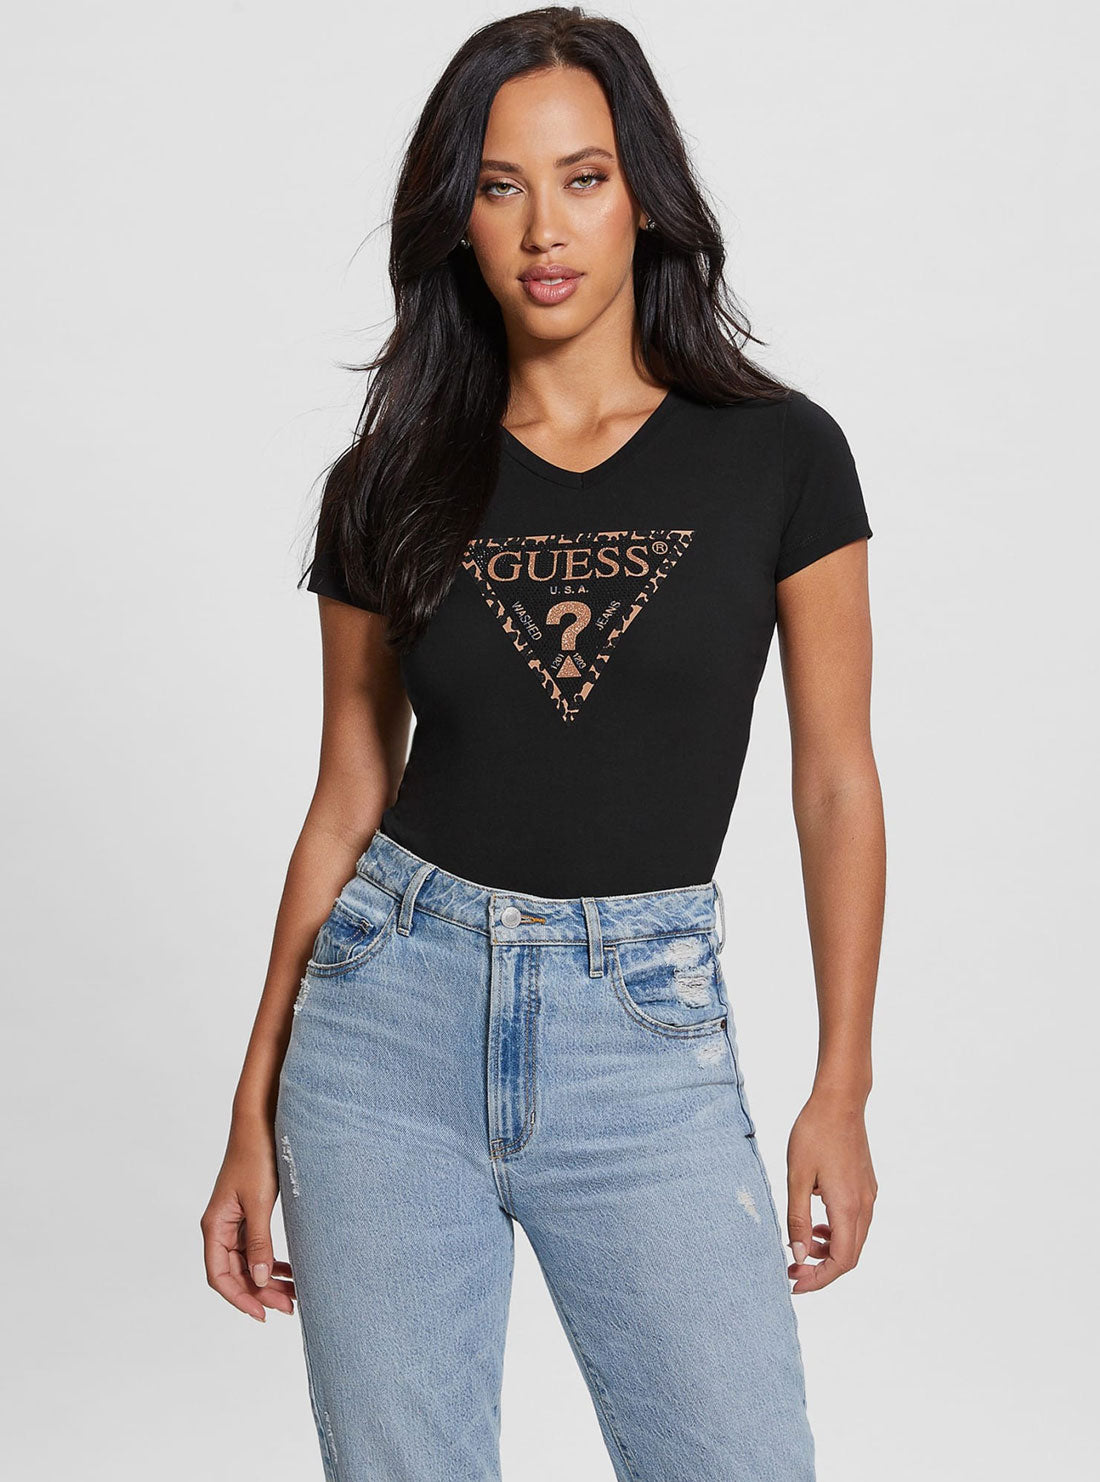 Black Leo Triangle Logo T-Shirt | GUESS Women's Apparel | front view